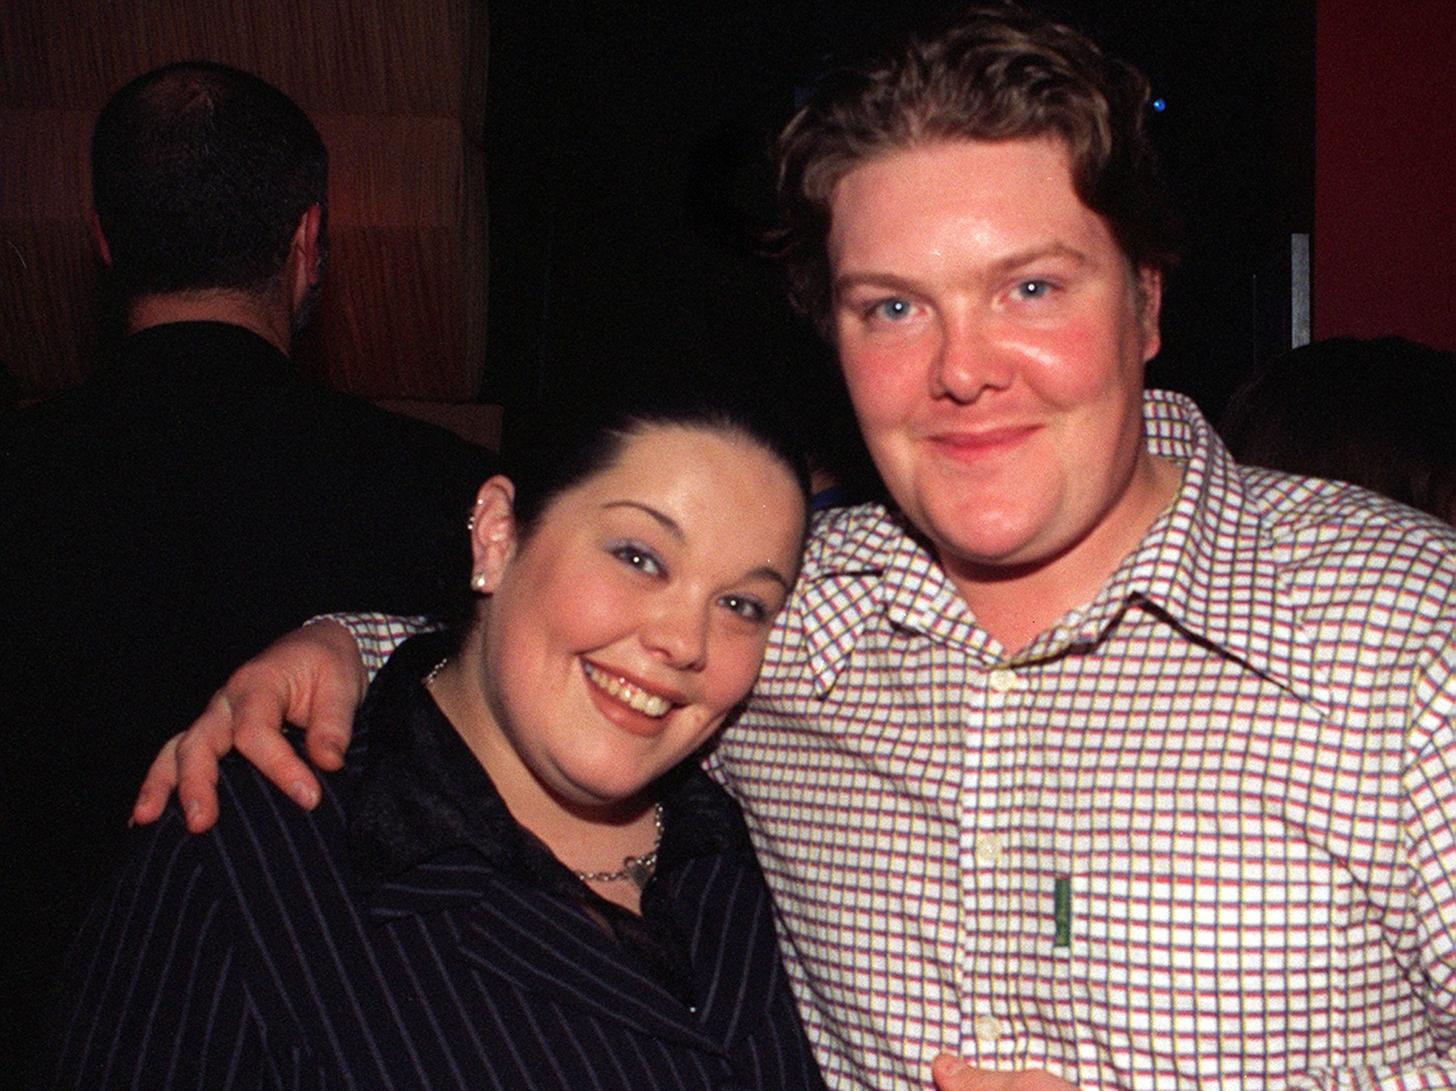 Emmerdale star Lisa Riley, who played Mandy Dingle with her on screen boyfriend, Paddy Kirk, played by Dominic Brunt, pictured on the opening night.